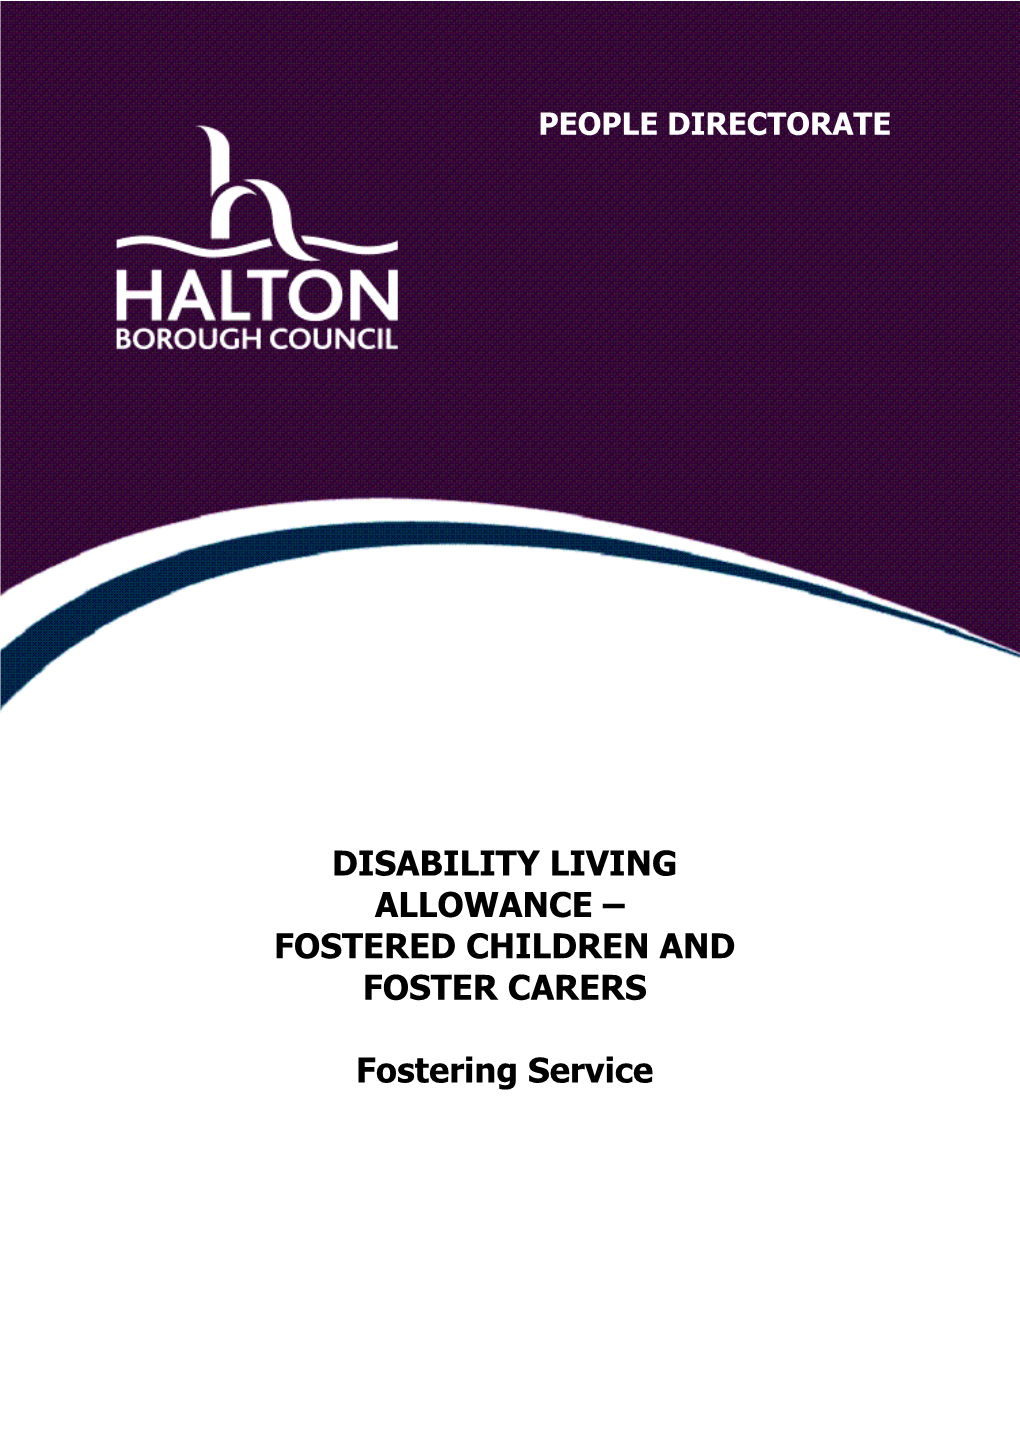 Disability Living Allowance - Fostered Children and Foster Carers